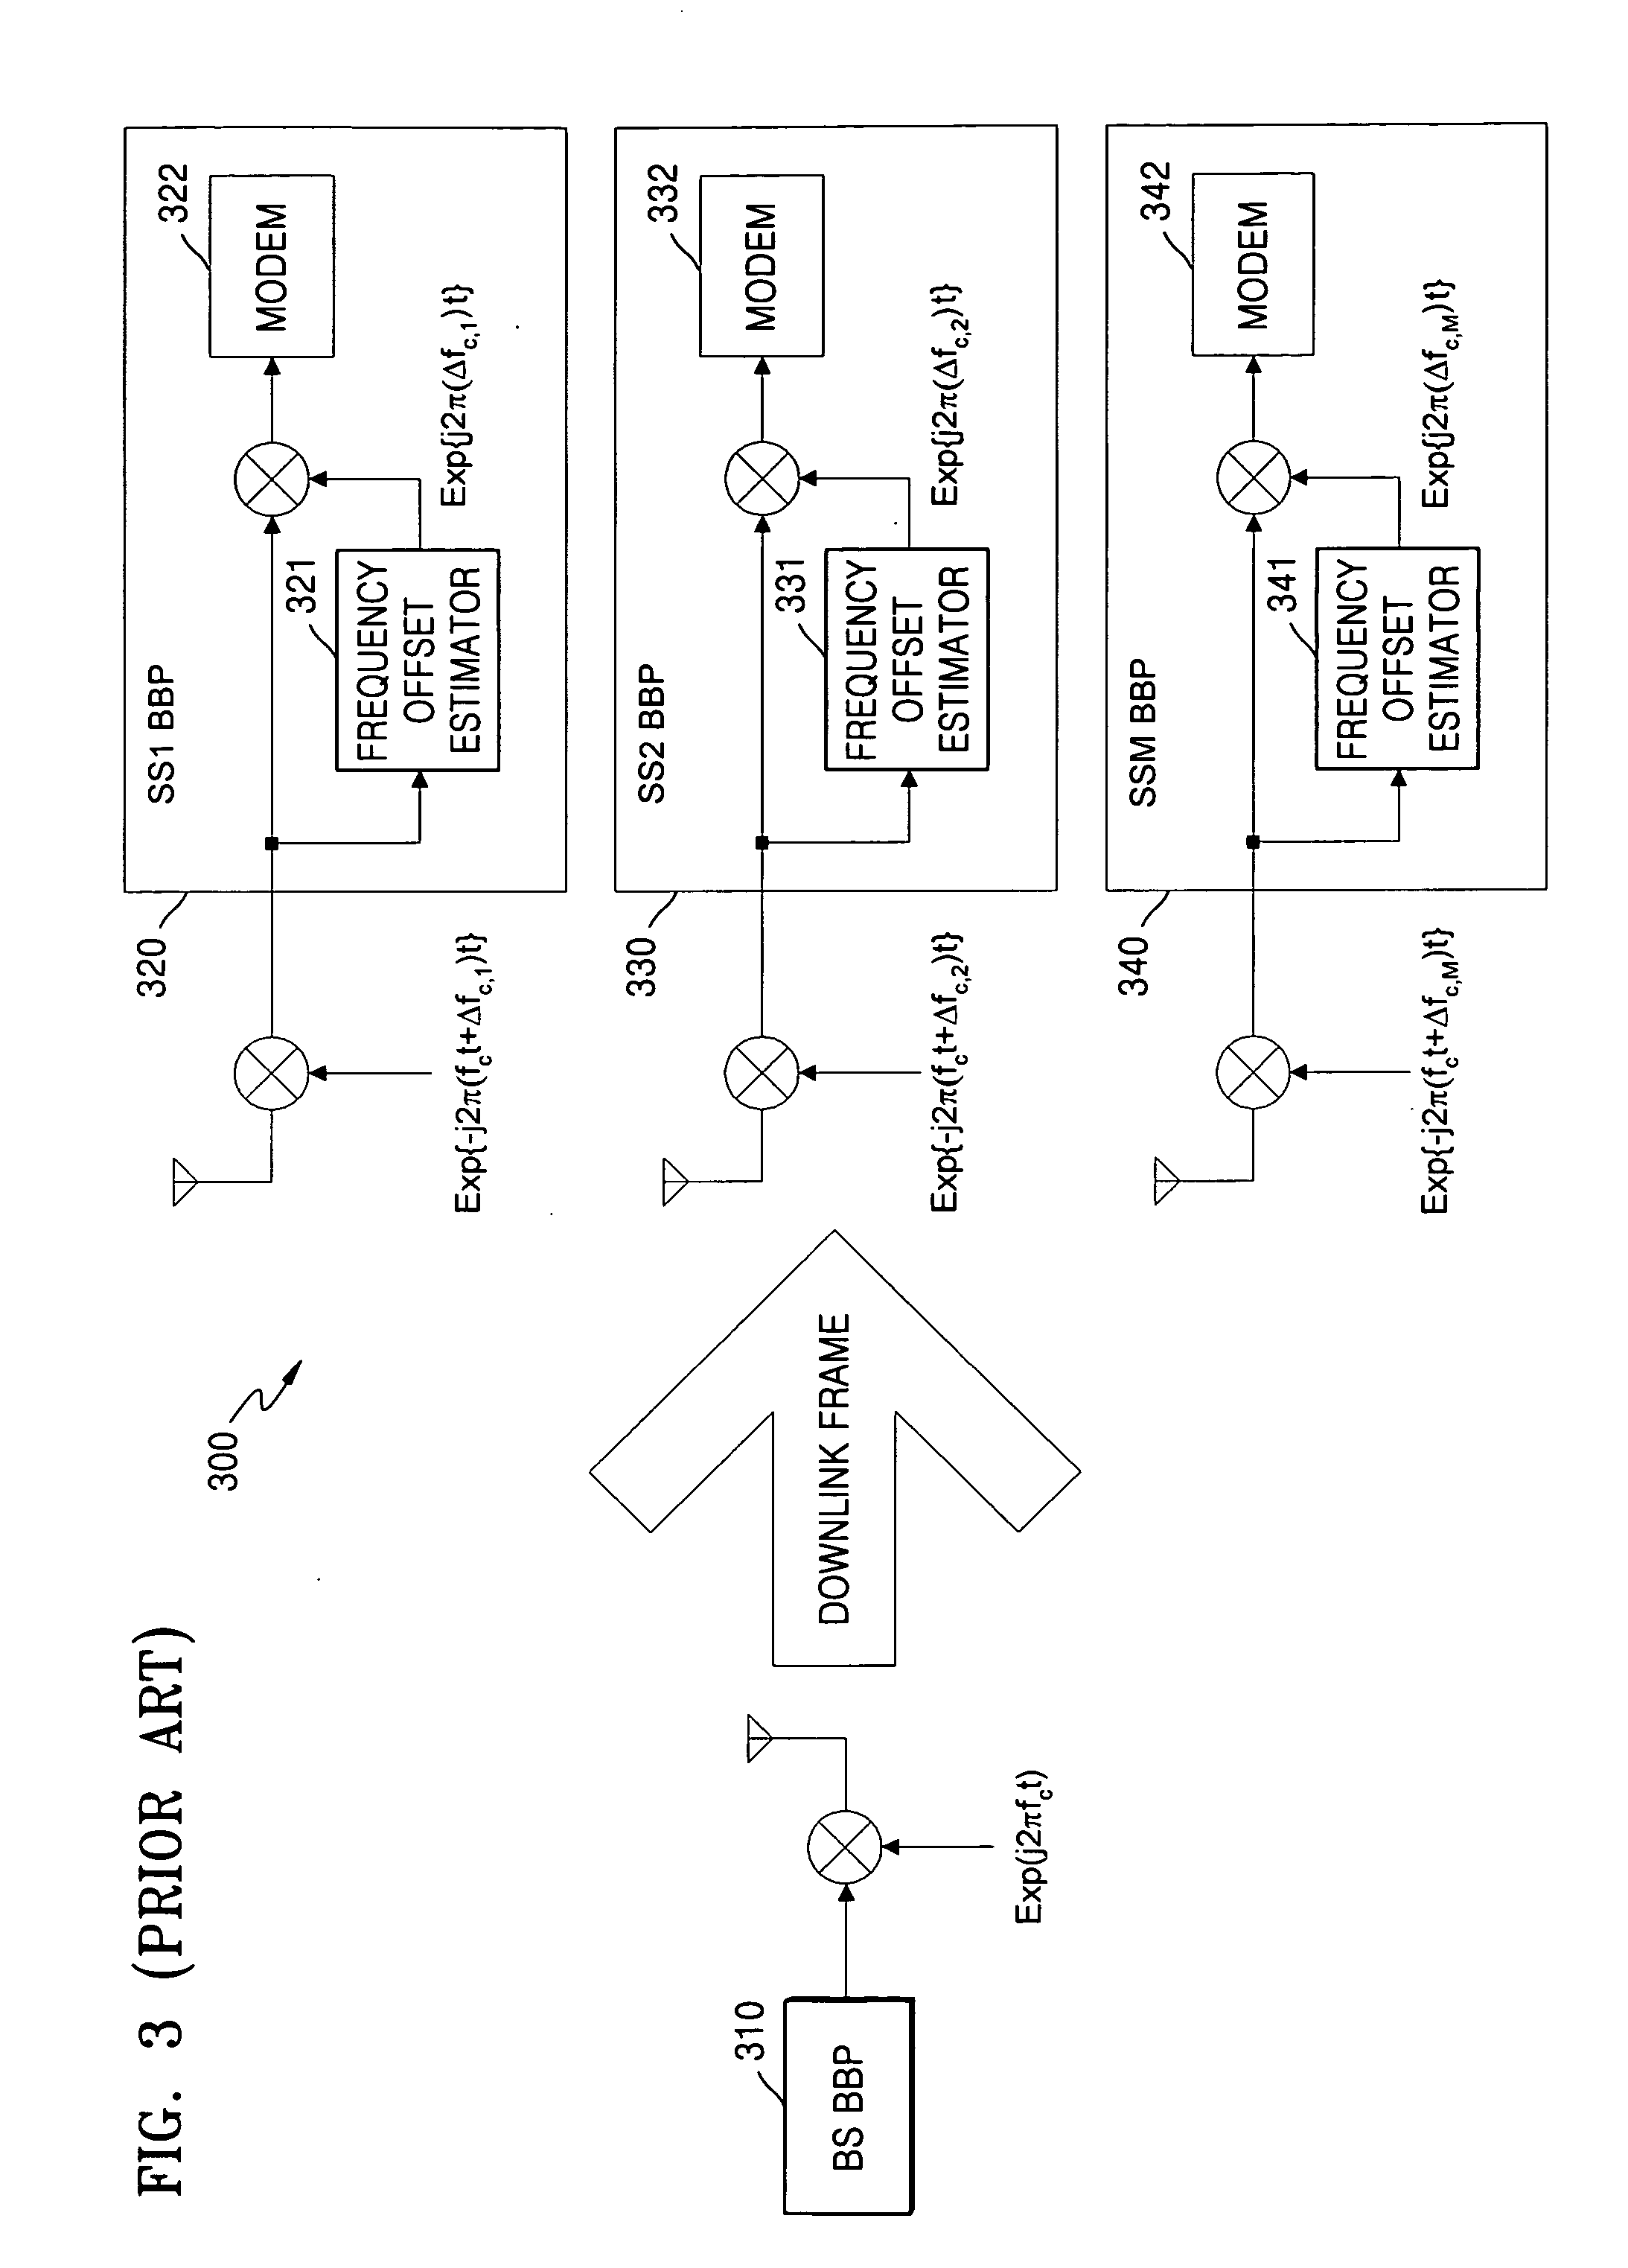 OFDMA system and method for controlling frequency offsets of subscribers in uplink communication